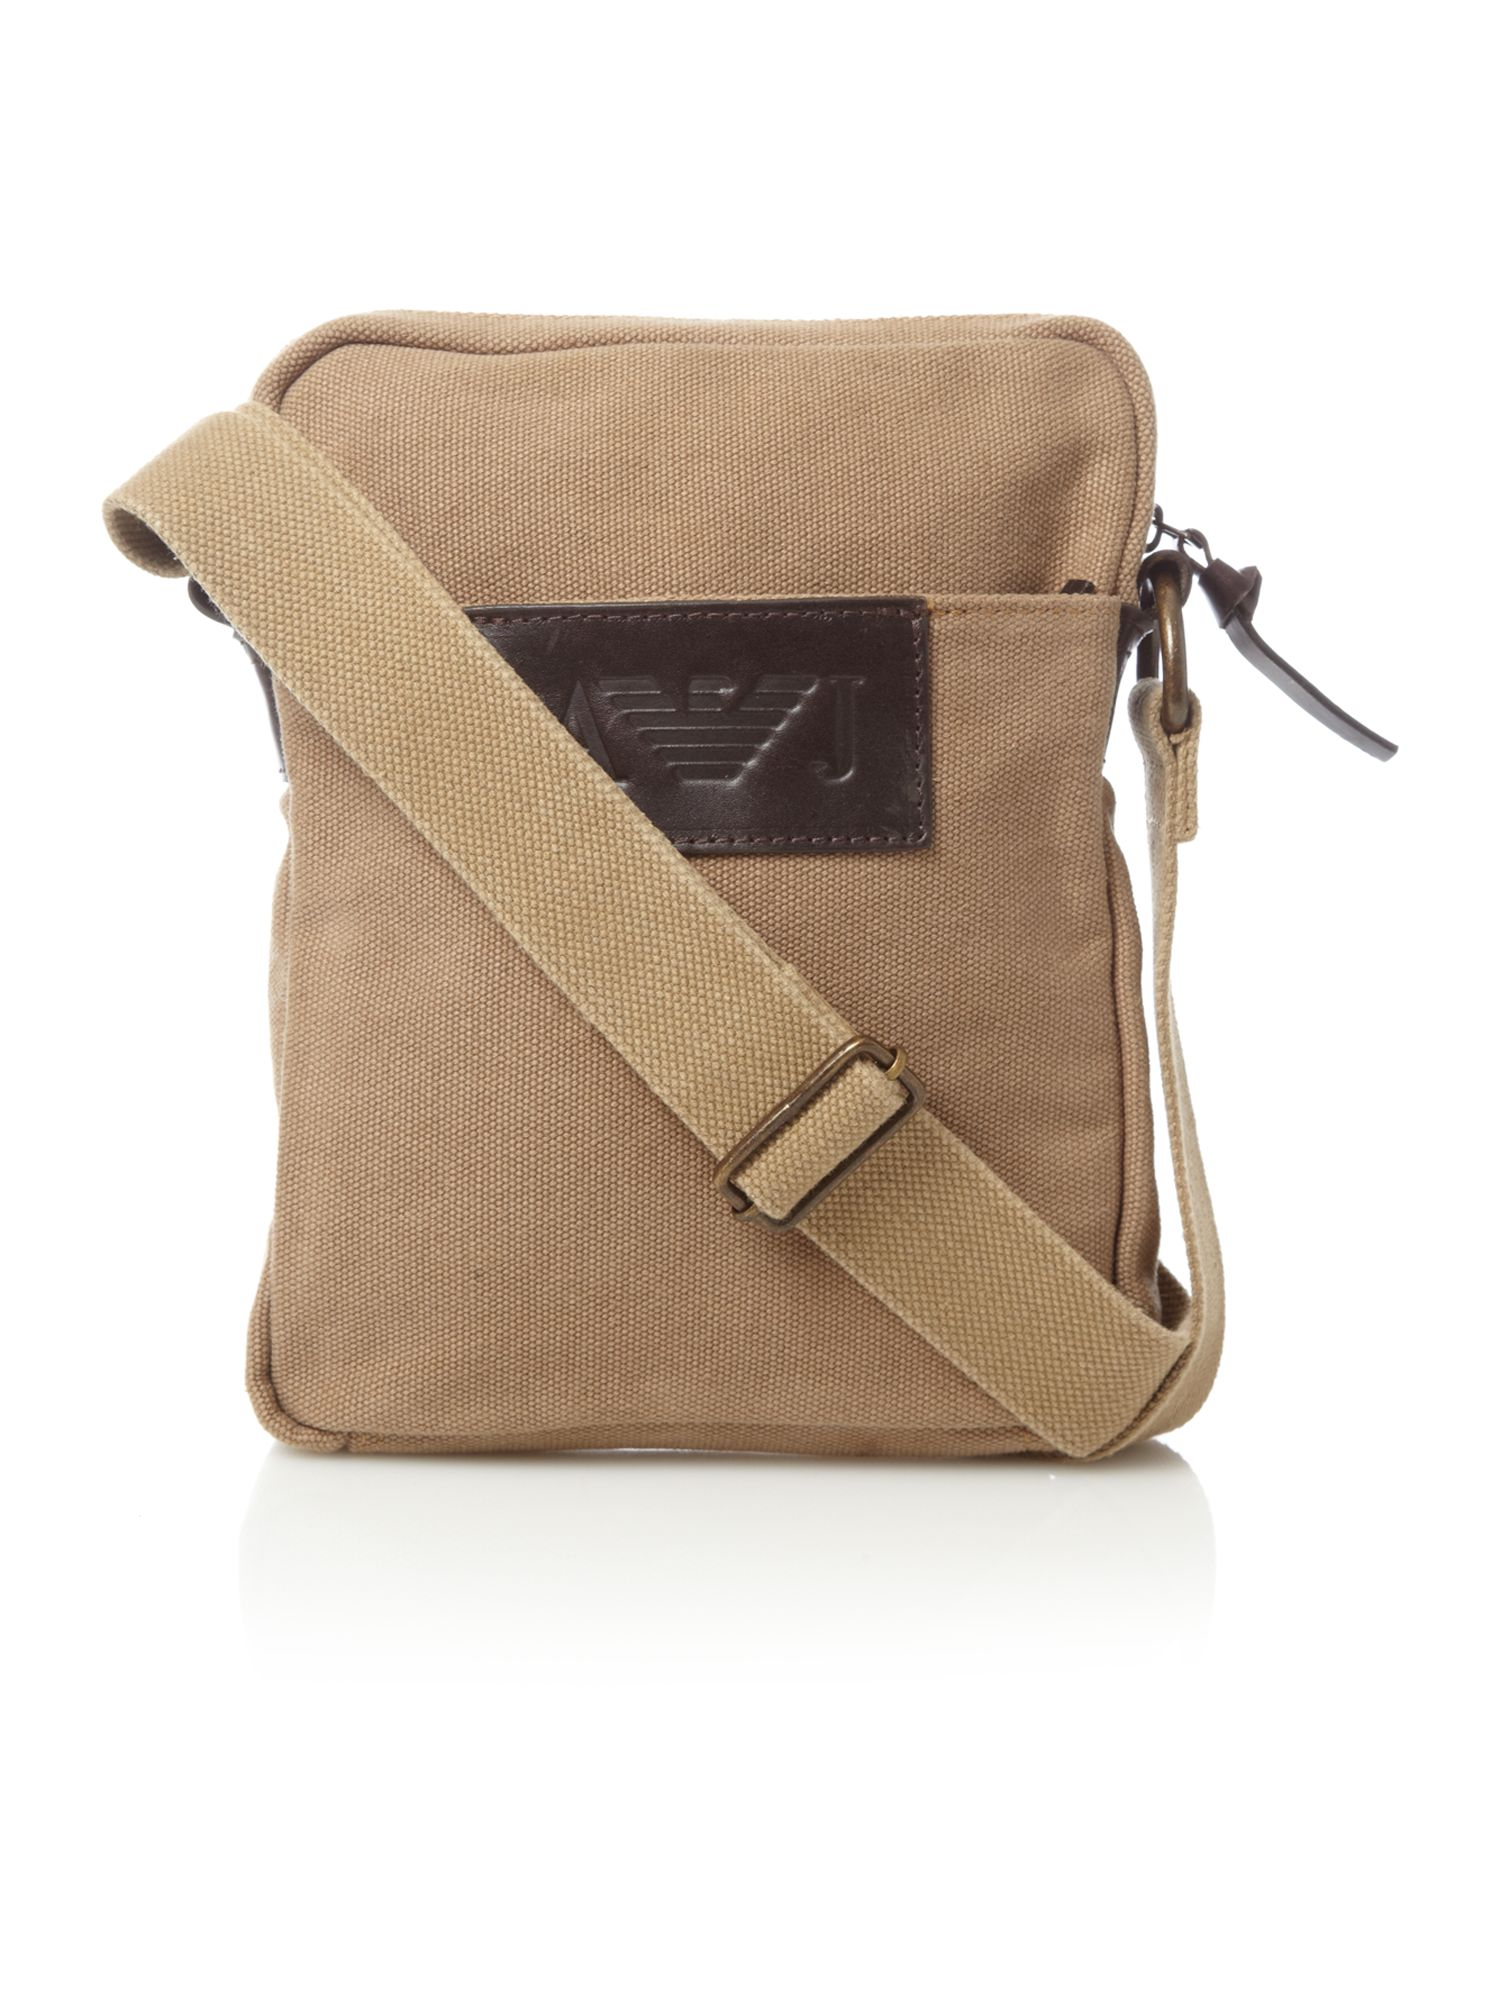 Armani Jeans Canvas Cross Body Bag in Brown for Men (sand) | Lyst